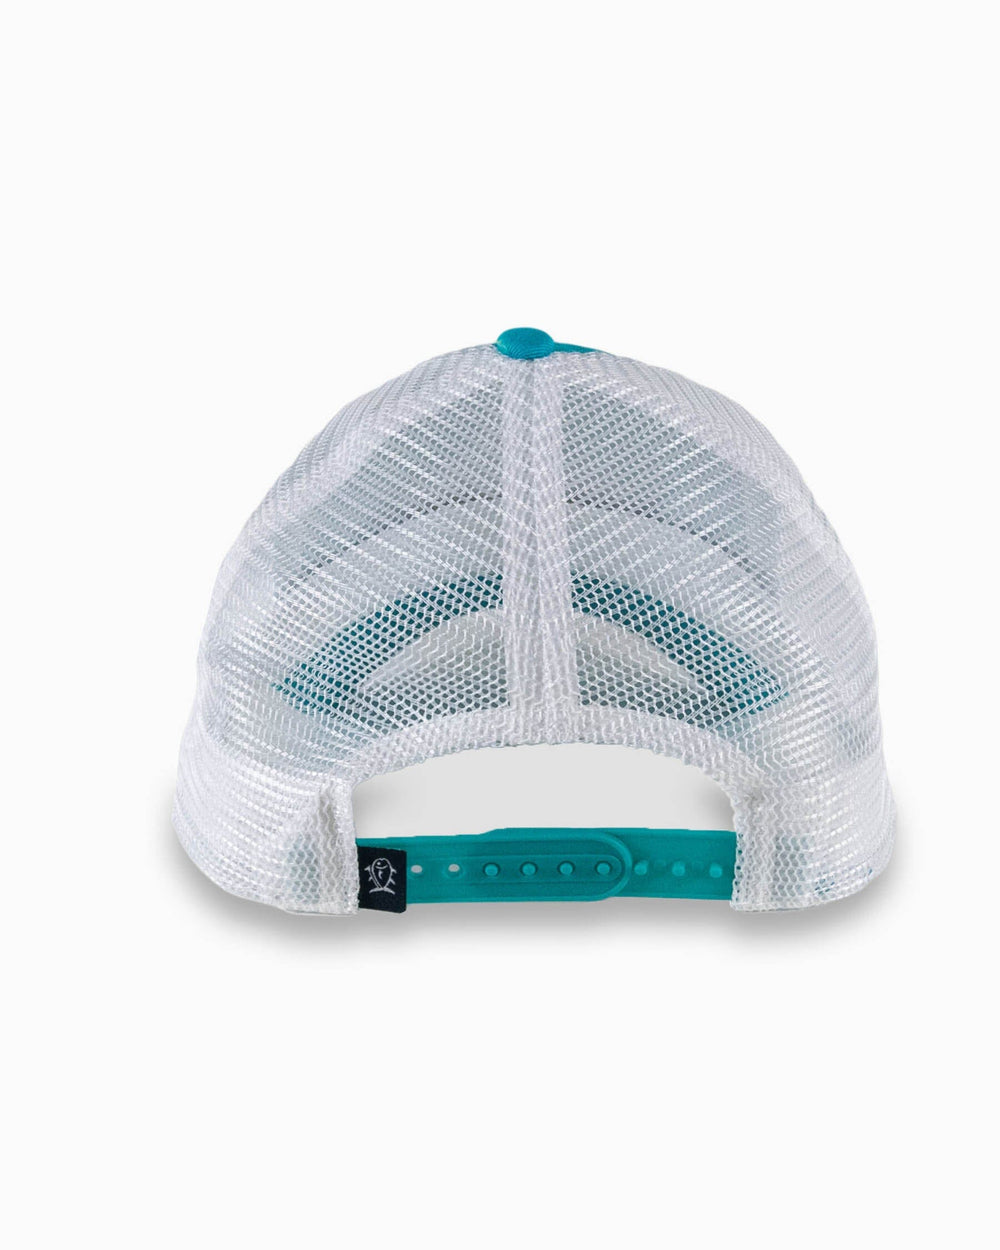 The back view of the Southern Tide Paddlin out Patch Trucker by Southern Tide - Turquoise